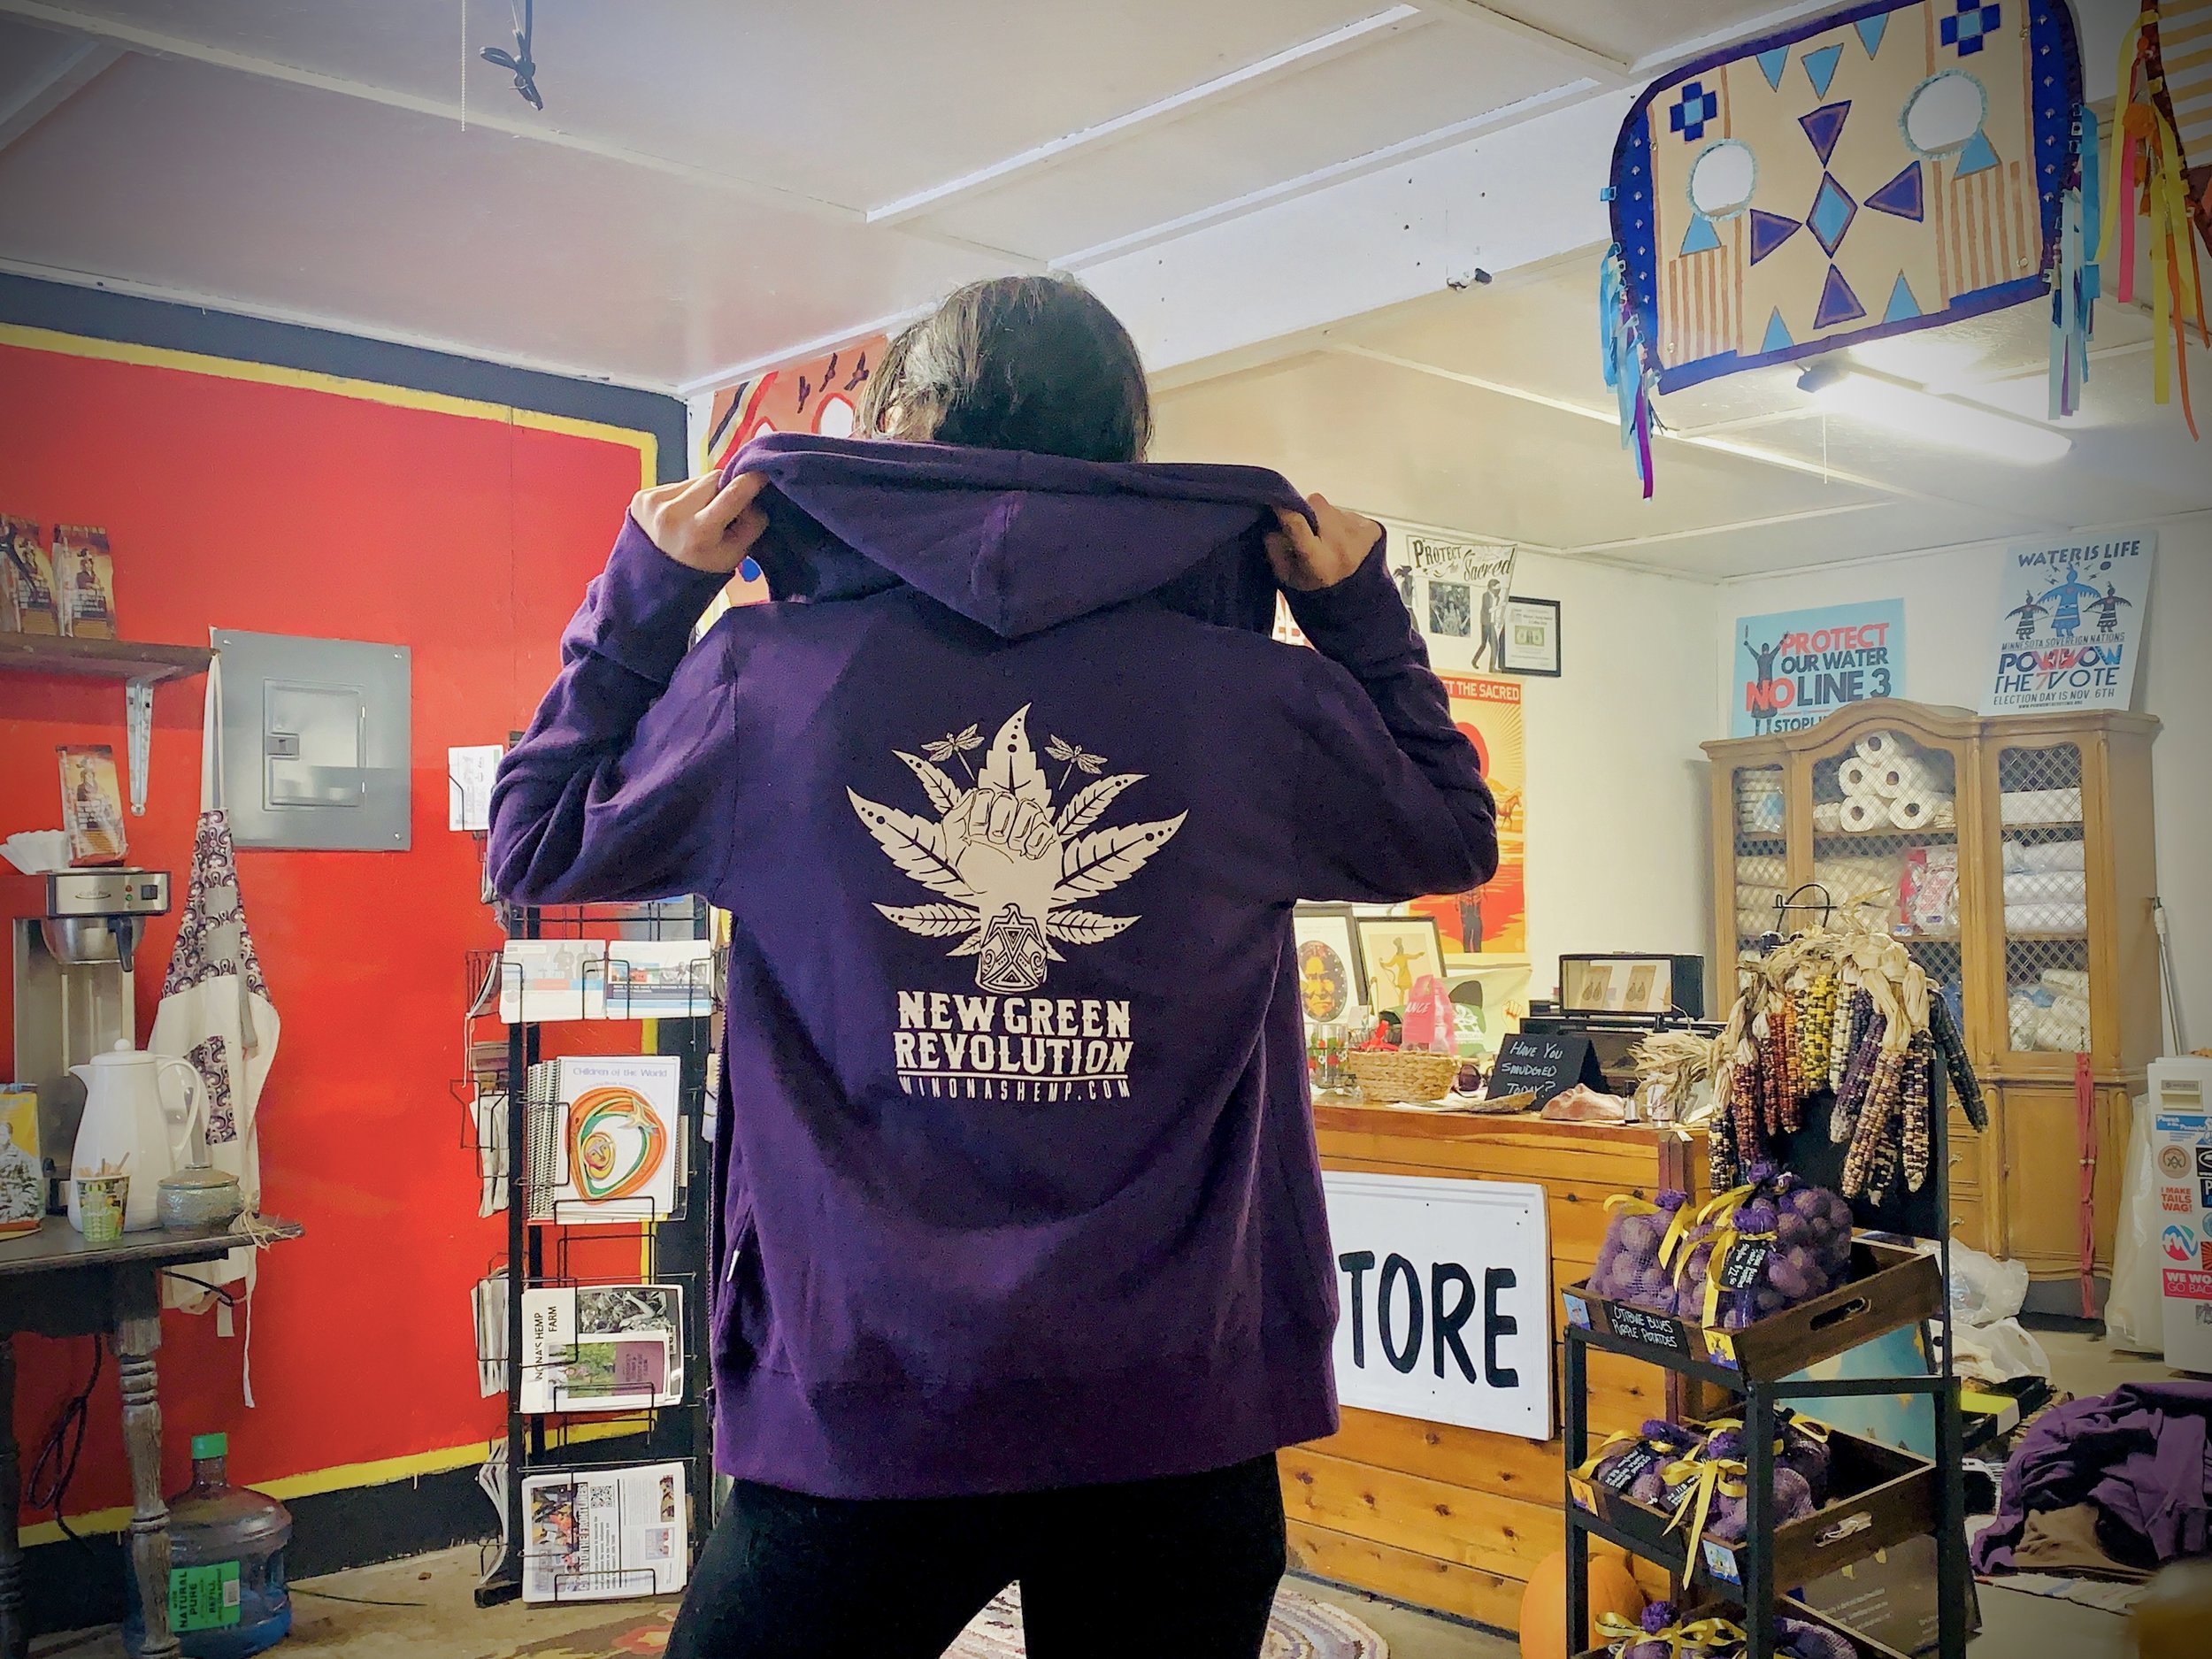 Plum colored Ladies Hemp Zip Up Hoodies are stylish and cool. We guarantee you will feel the difference when wearing our Hemp/Org Cotton fleece!